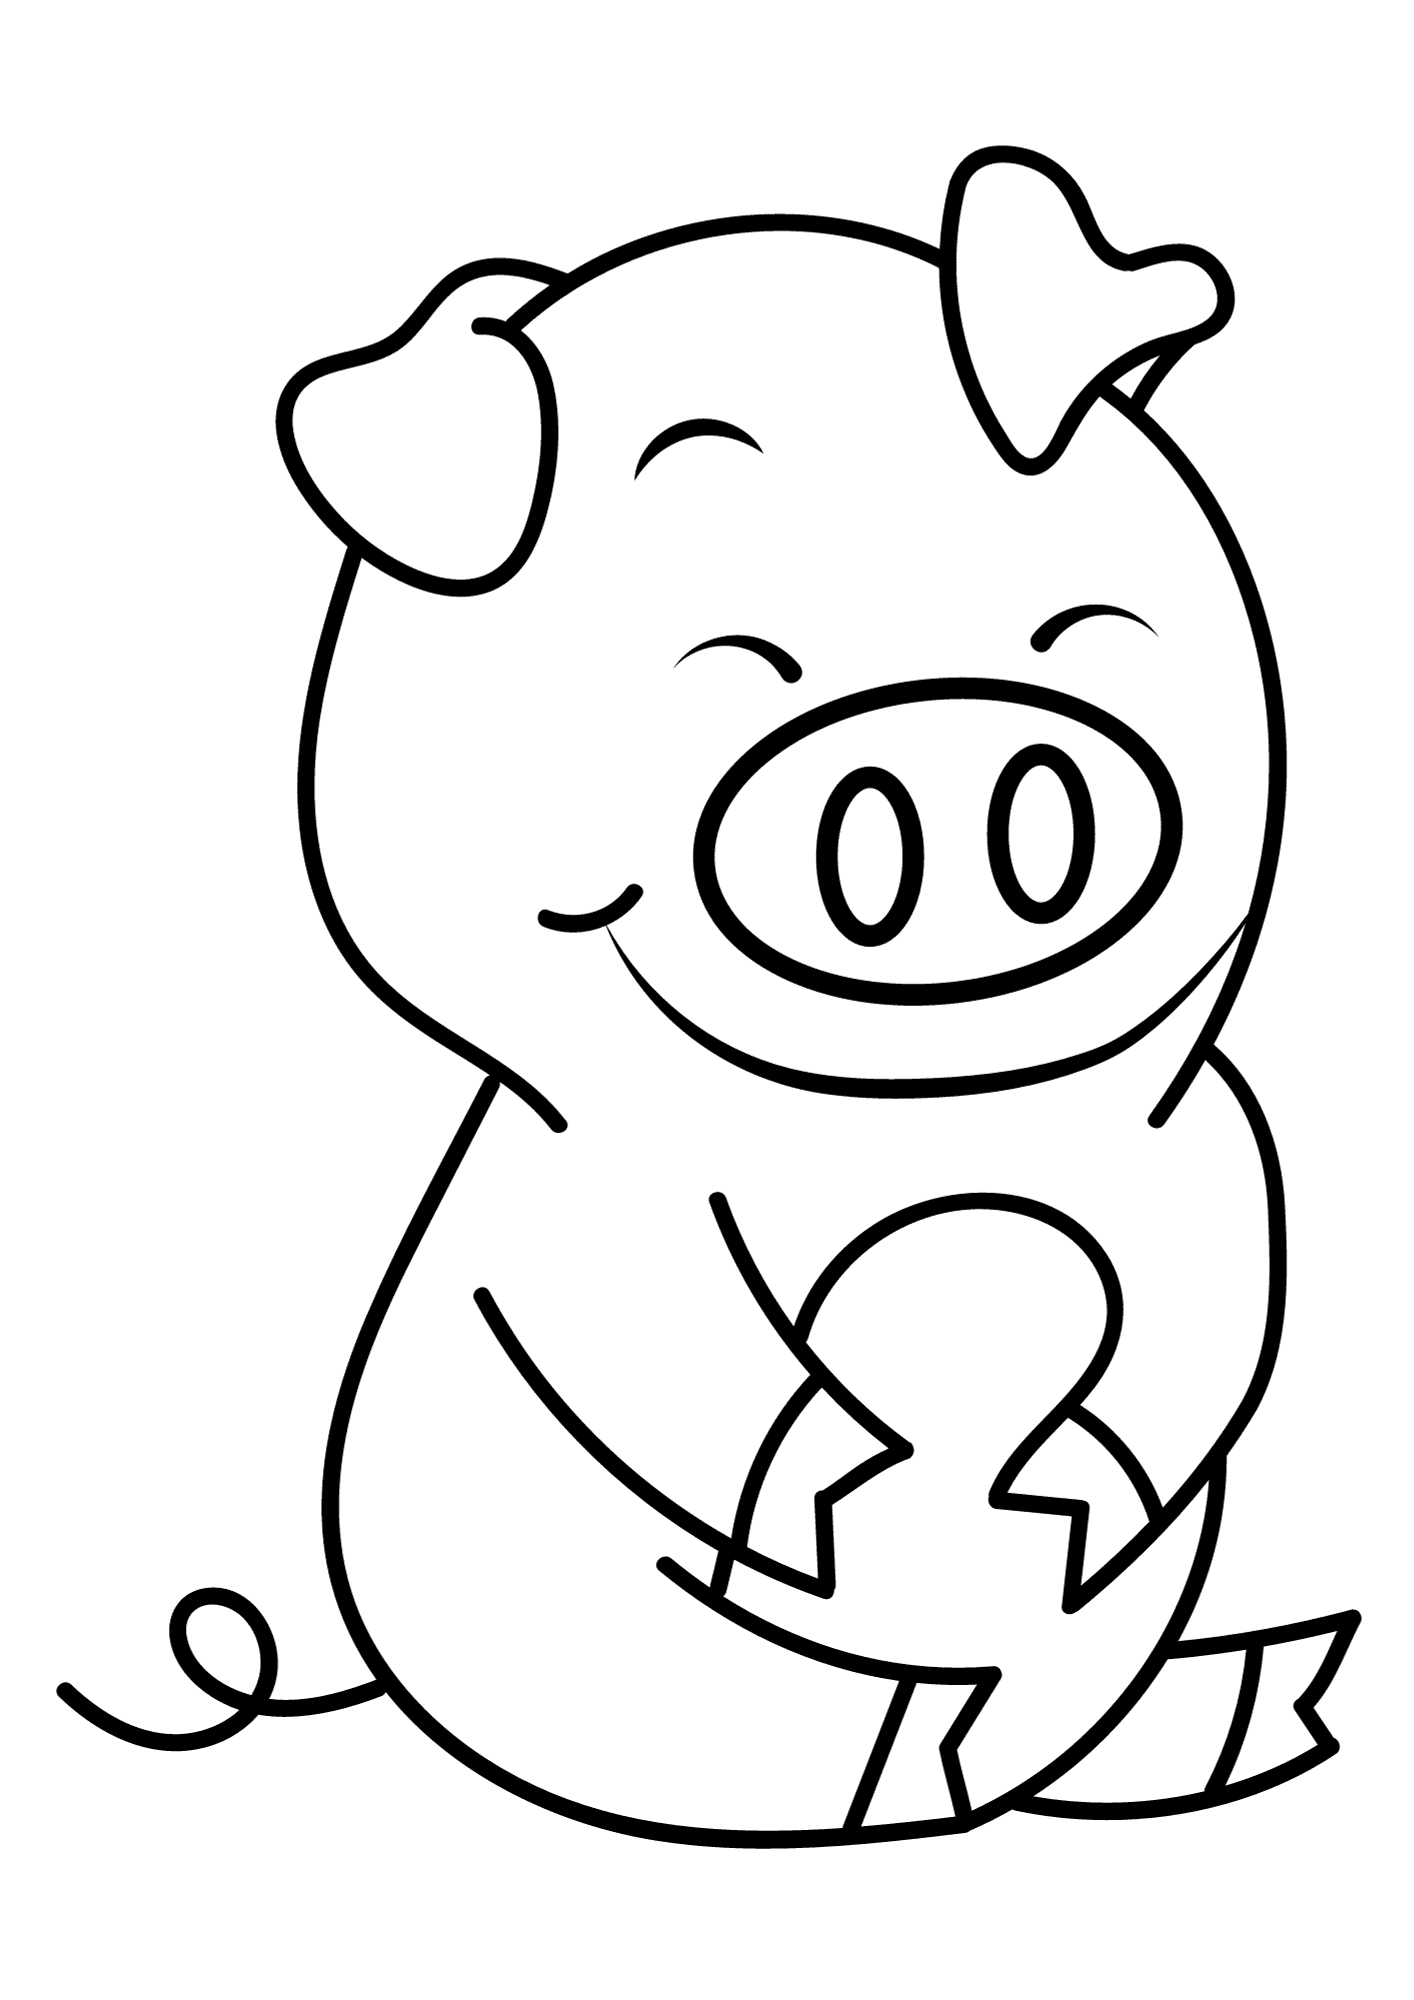 Funny Pig Coloring Page